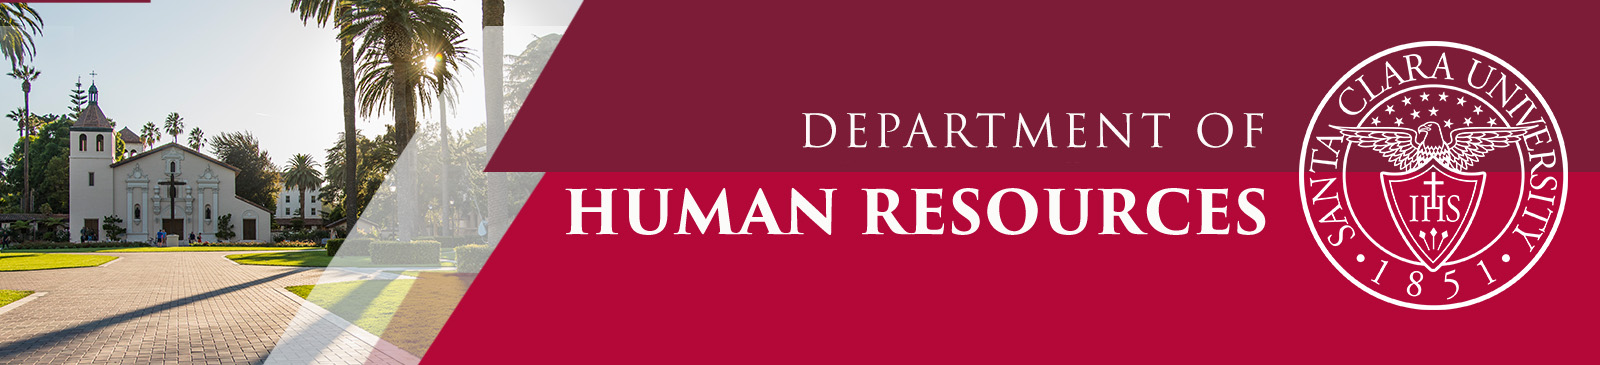 Department of Human Resources with University Seal Email Banner